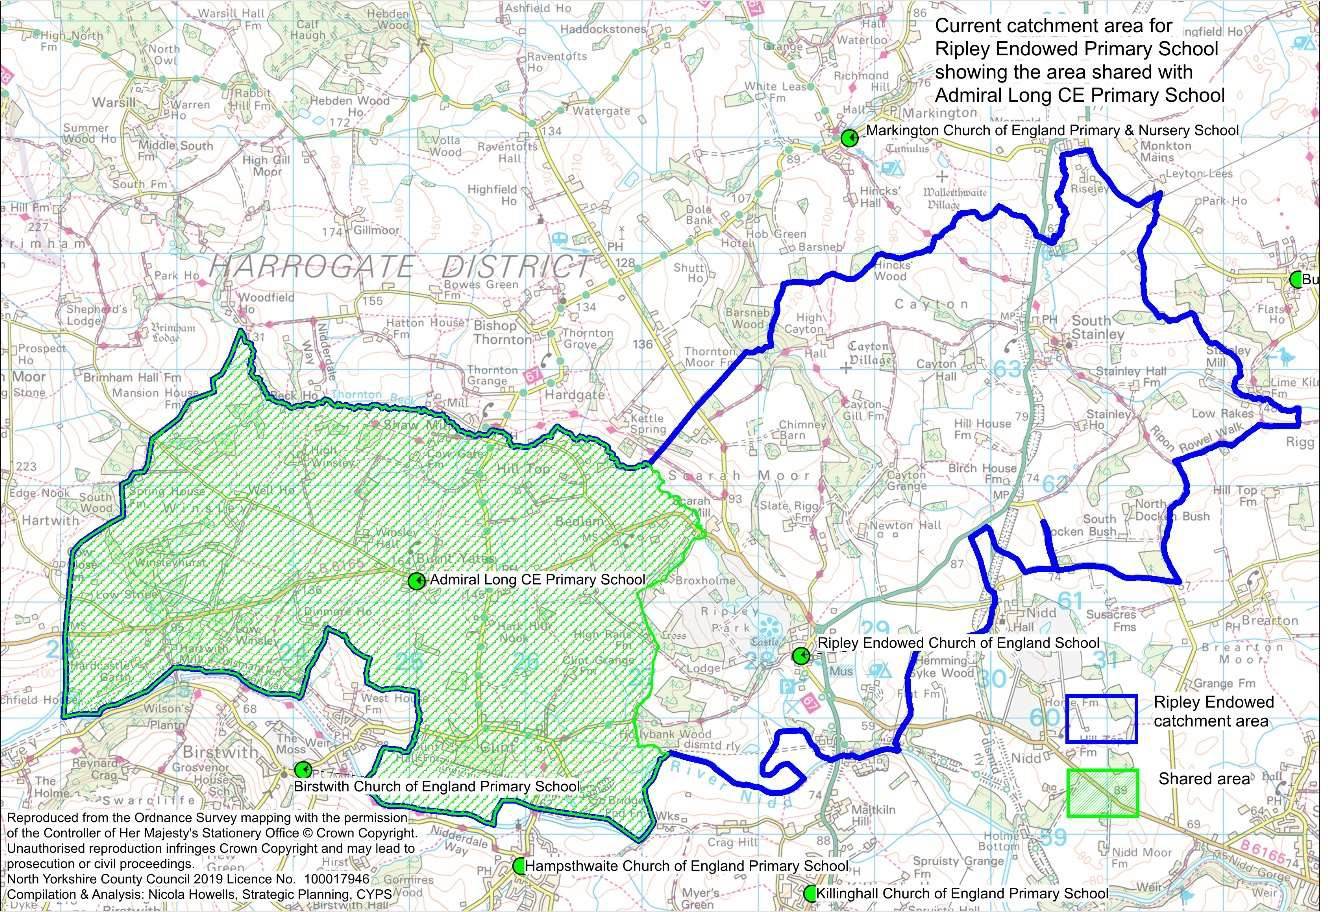 Current catchment area Ripley Endowed Church of England Primary School. Contact us for this in another format.